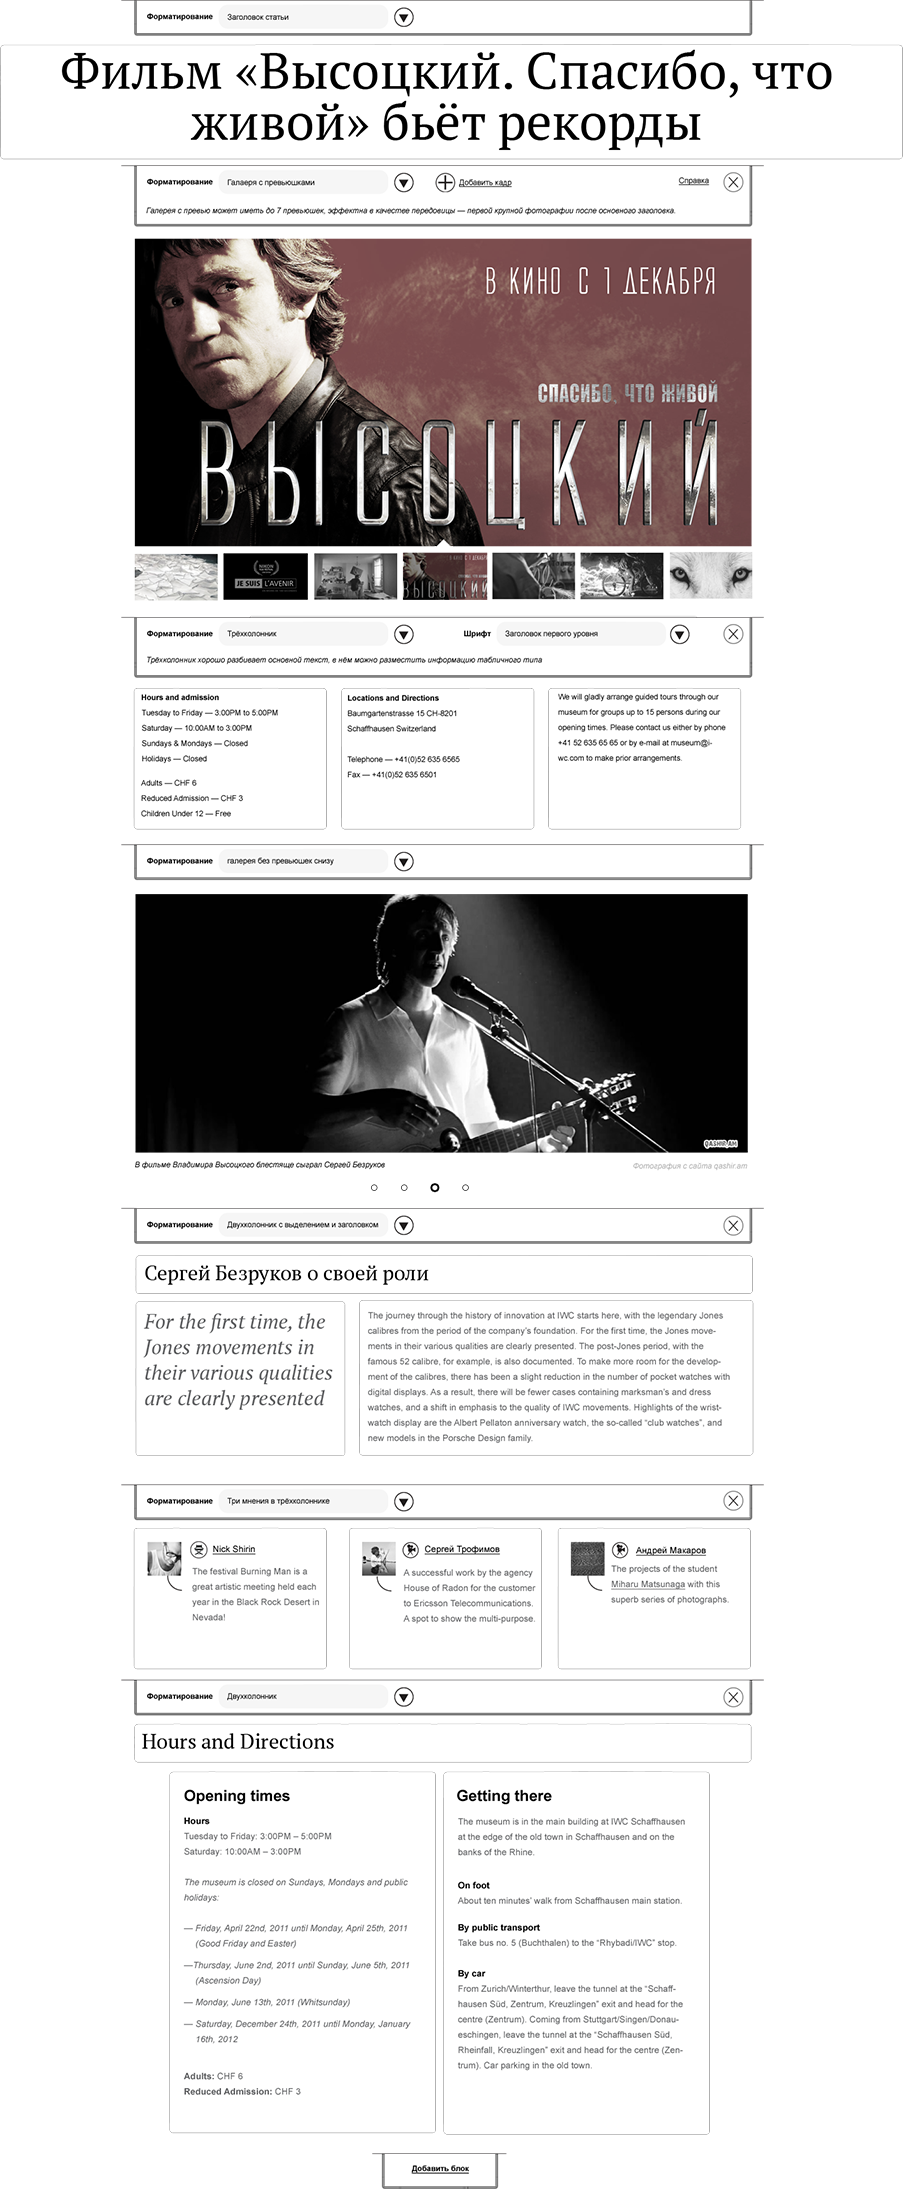 large page with Vladimir Vysotsky at its top, showing you how user can edit their posts and how nativly all what you see is what you finally get